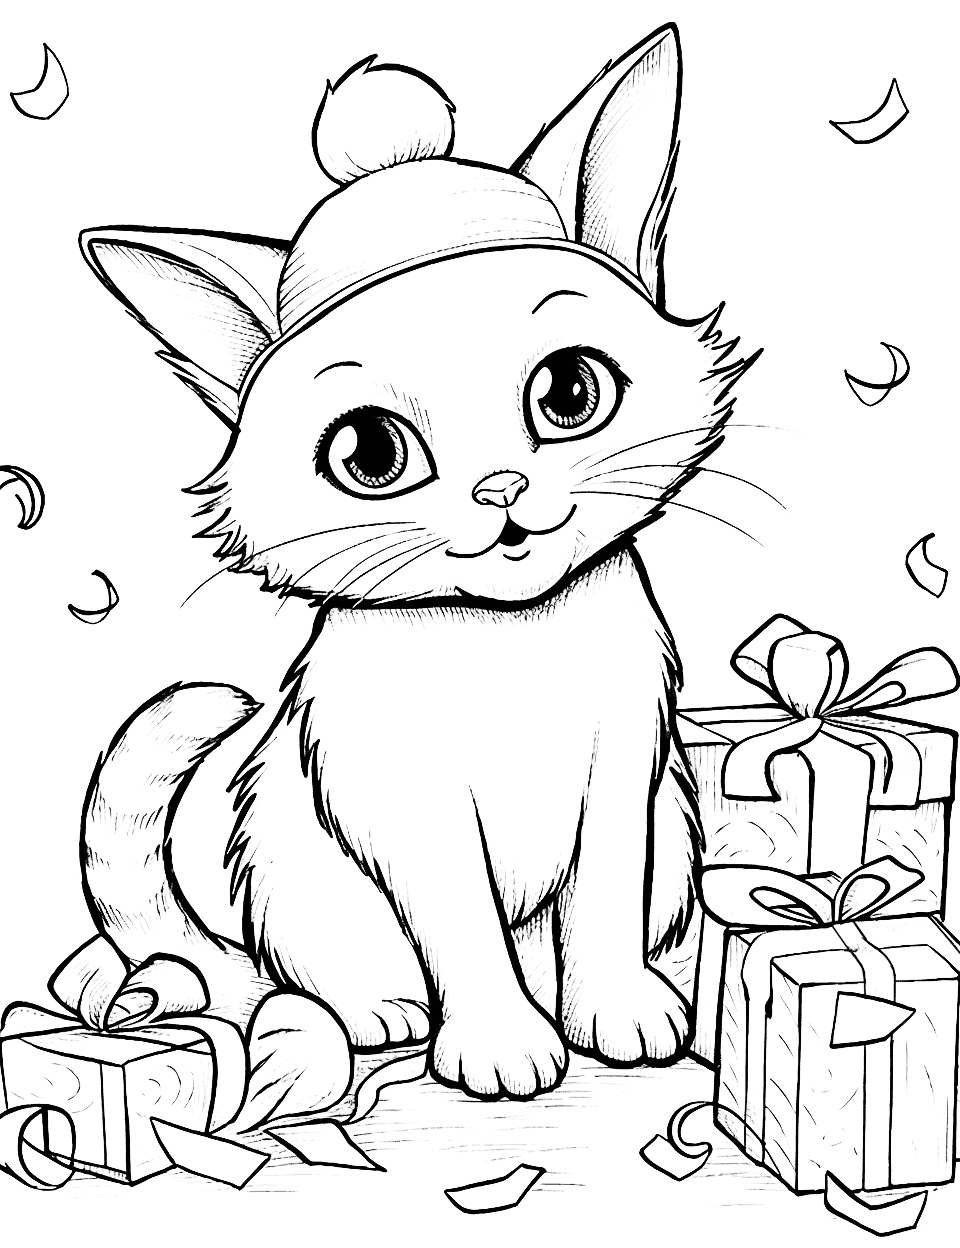 Birthday Party Cat Coloring Page - A jolly cat celebrating its birthday, surrounded by presents and confetti.